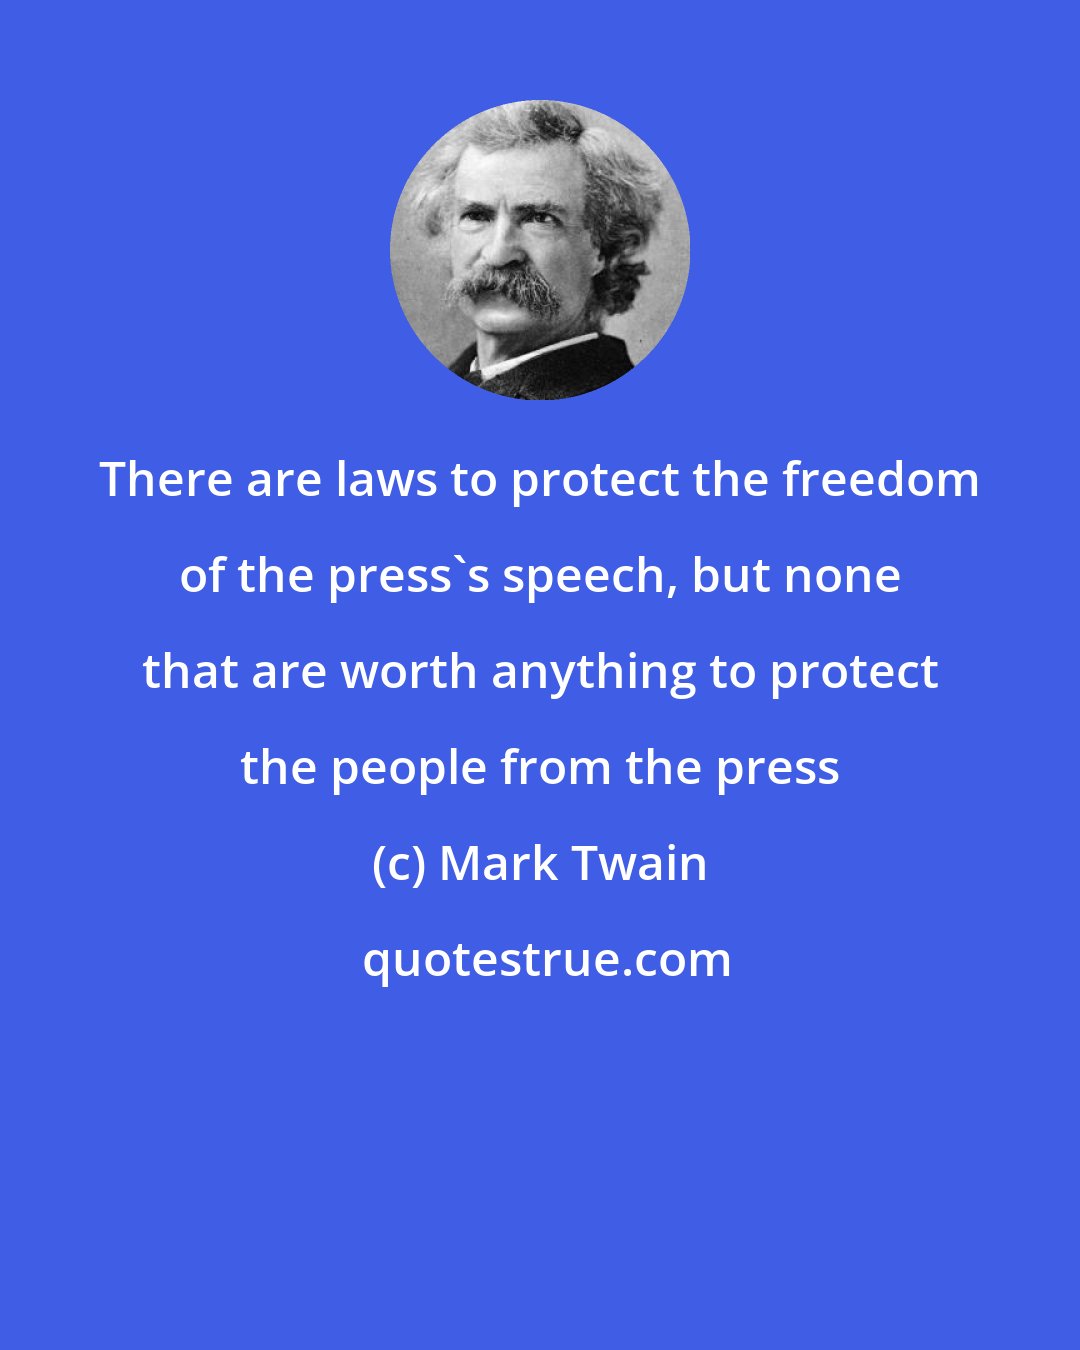 Mark Twain: There are laws to protect the freedom of the press's speech, but none that are worth anything to protect the people from the press